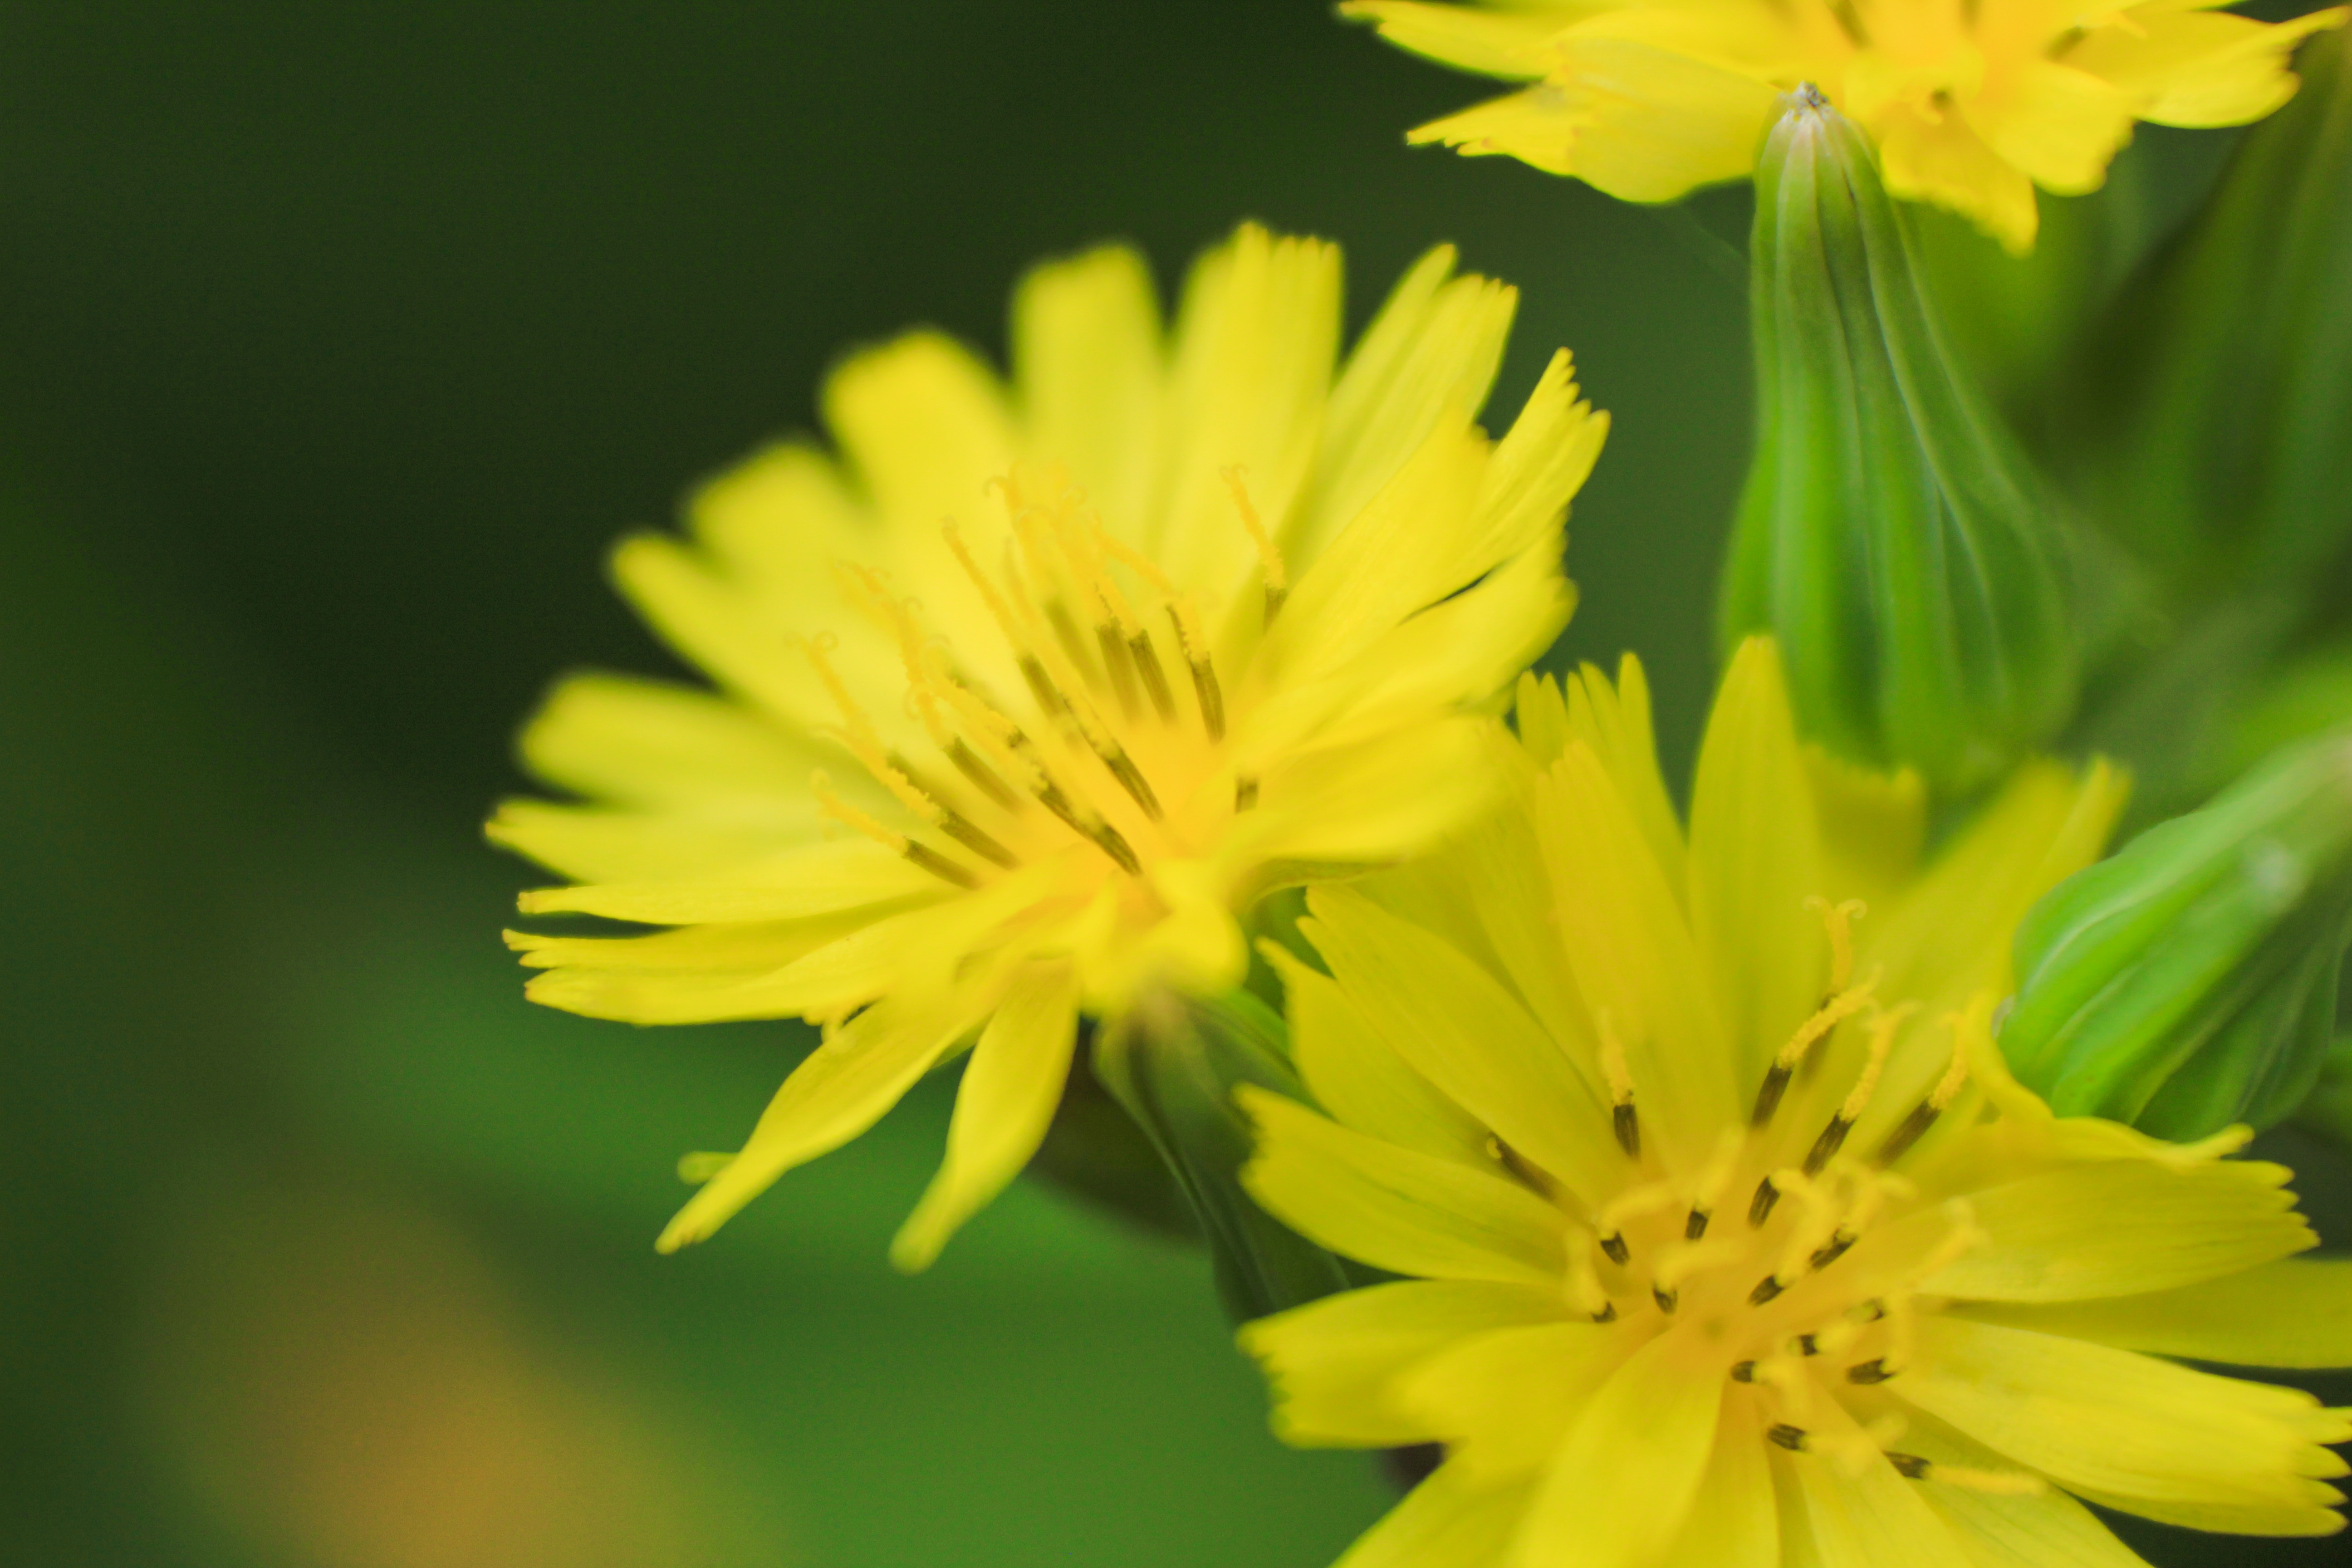 close up photography of yellow petaled flowers